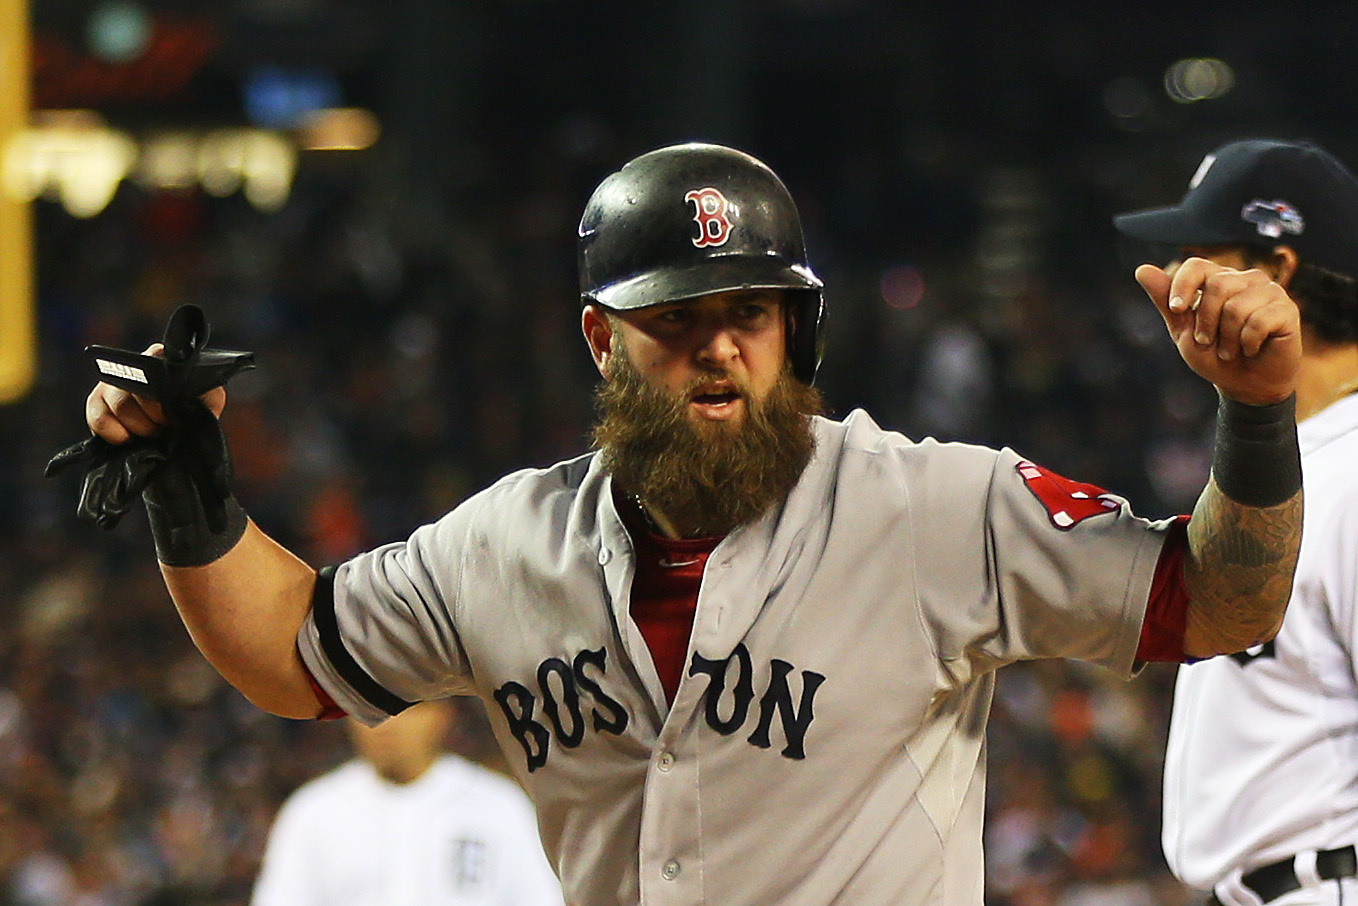 Power Ranking All Red Sox Beards at the 2013 World Series